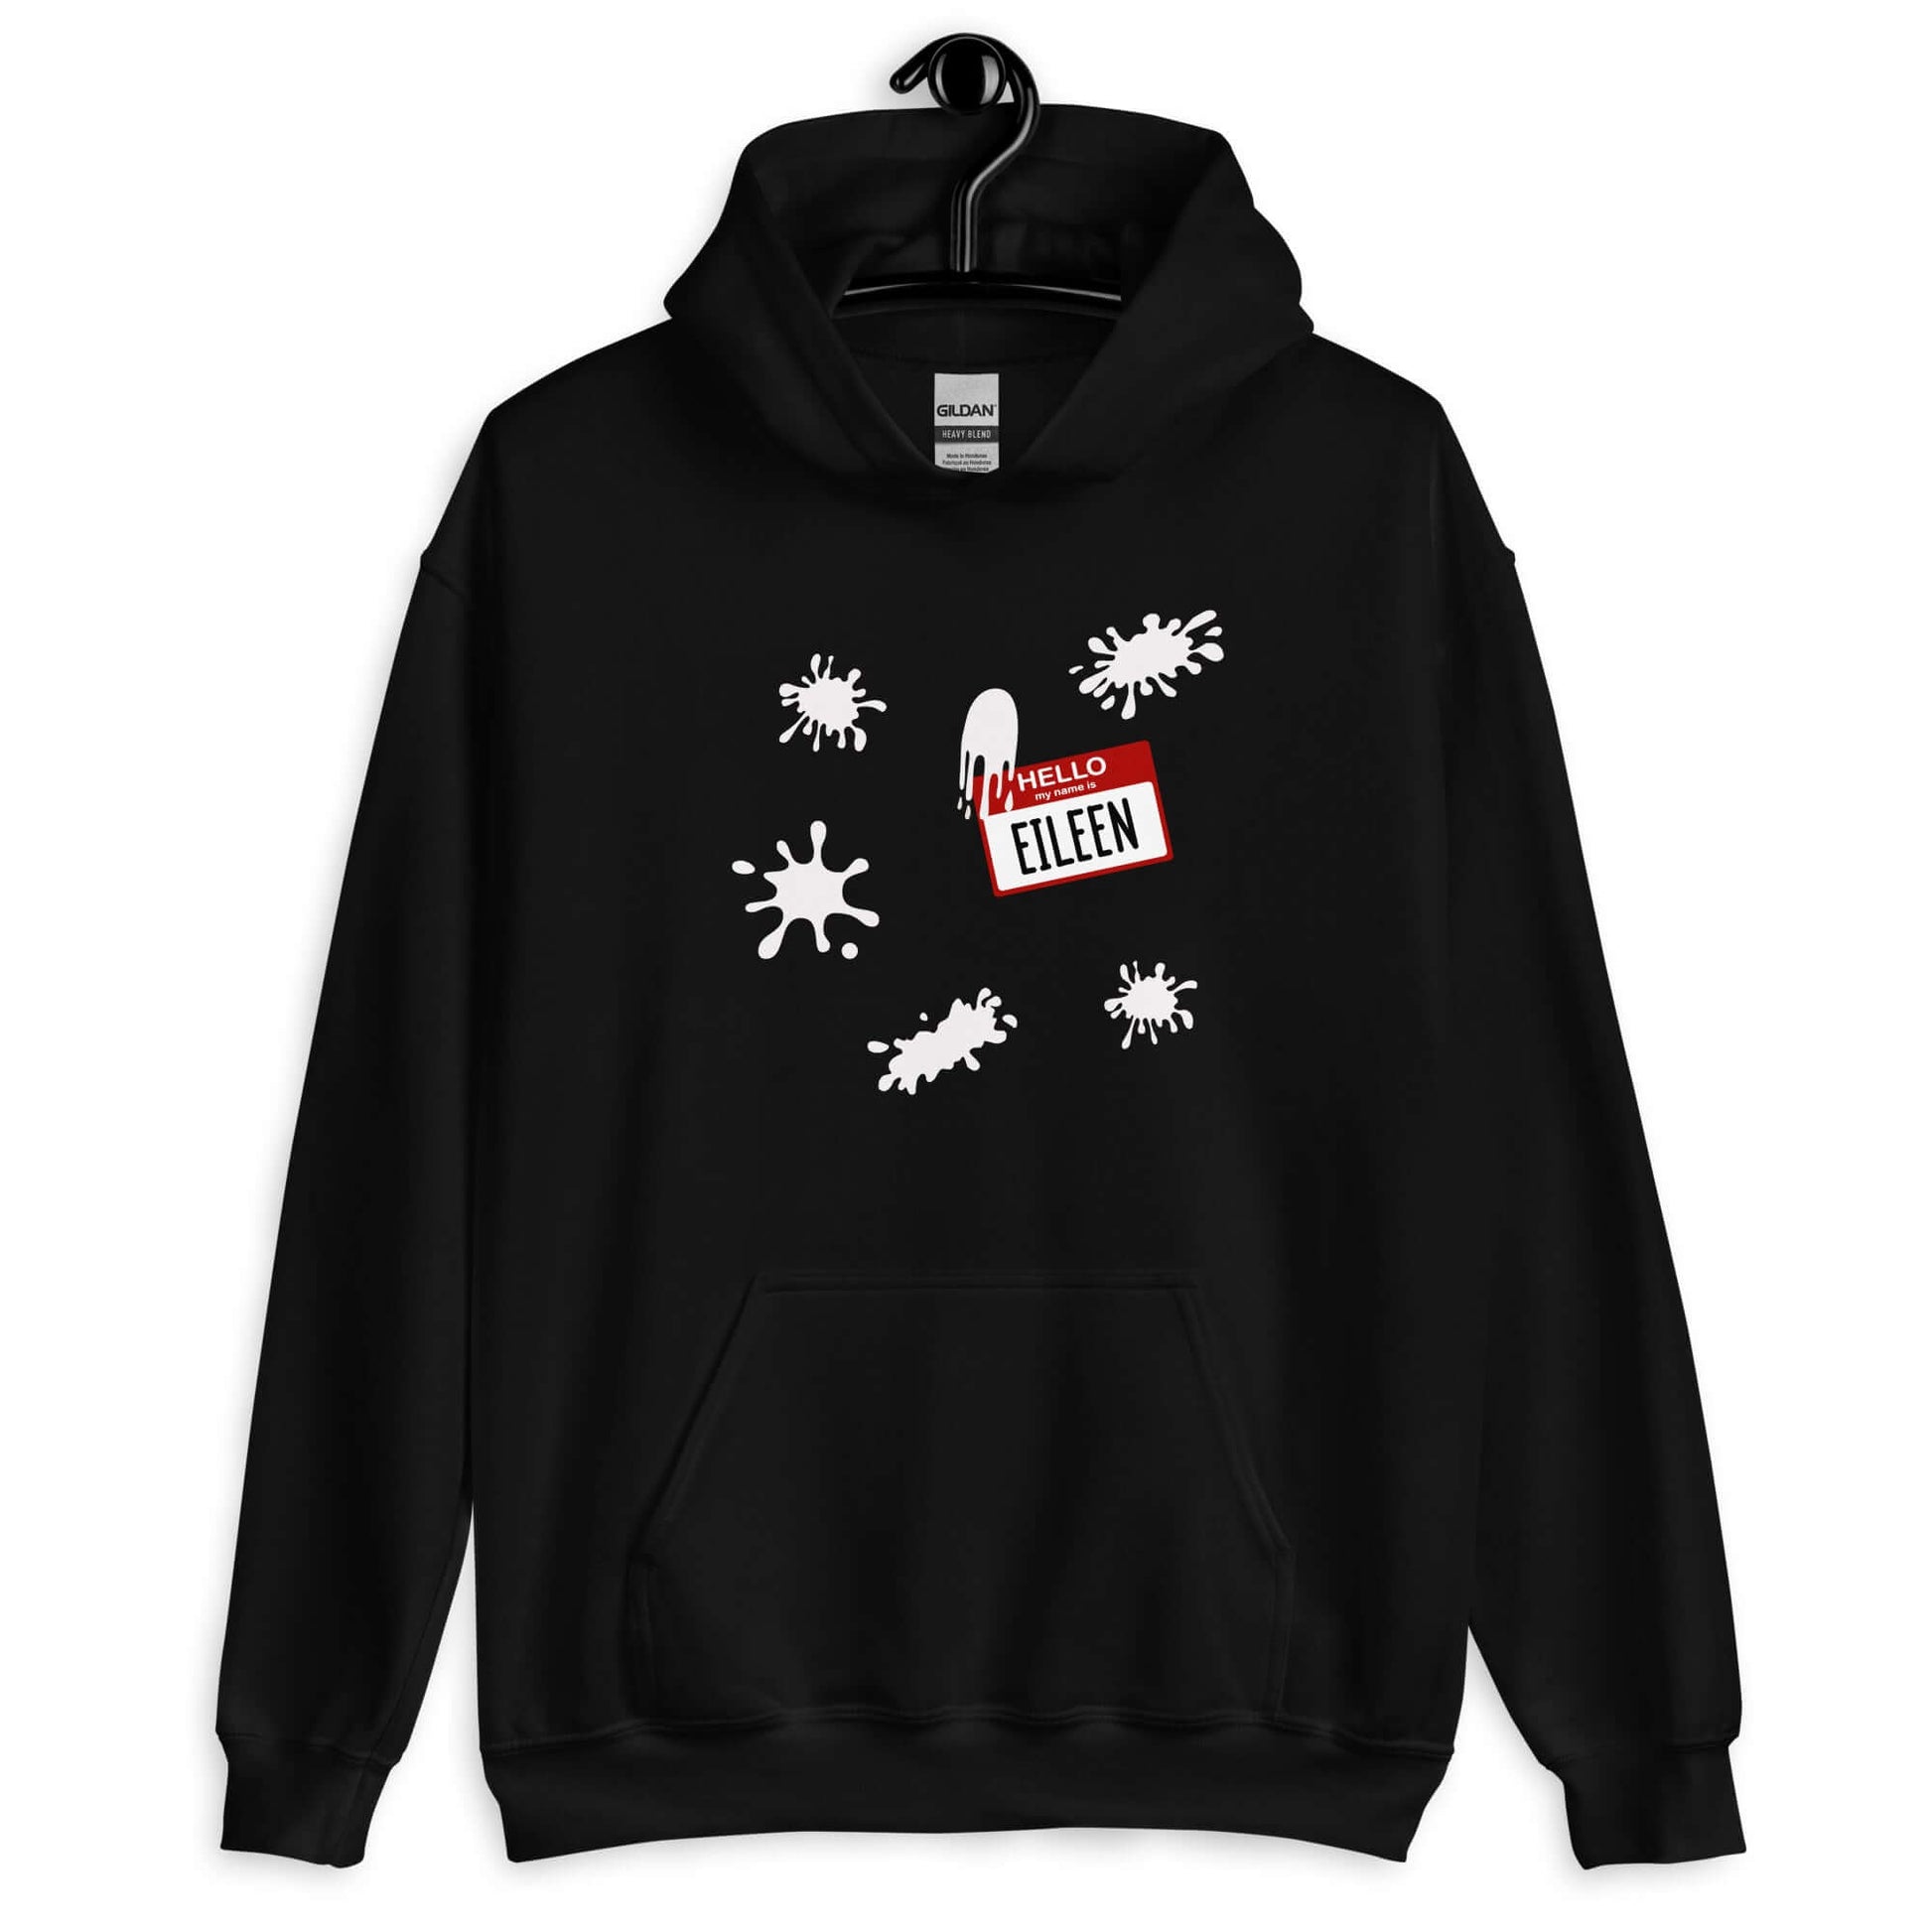 Black hoodie sweatshirt with Eileen name tag and white splatters printed on the front.